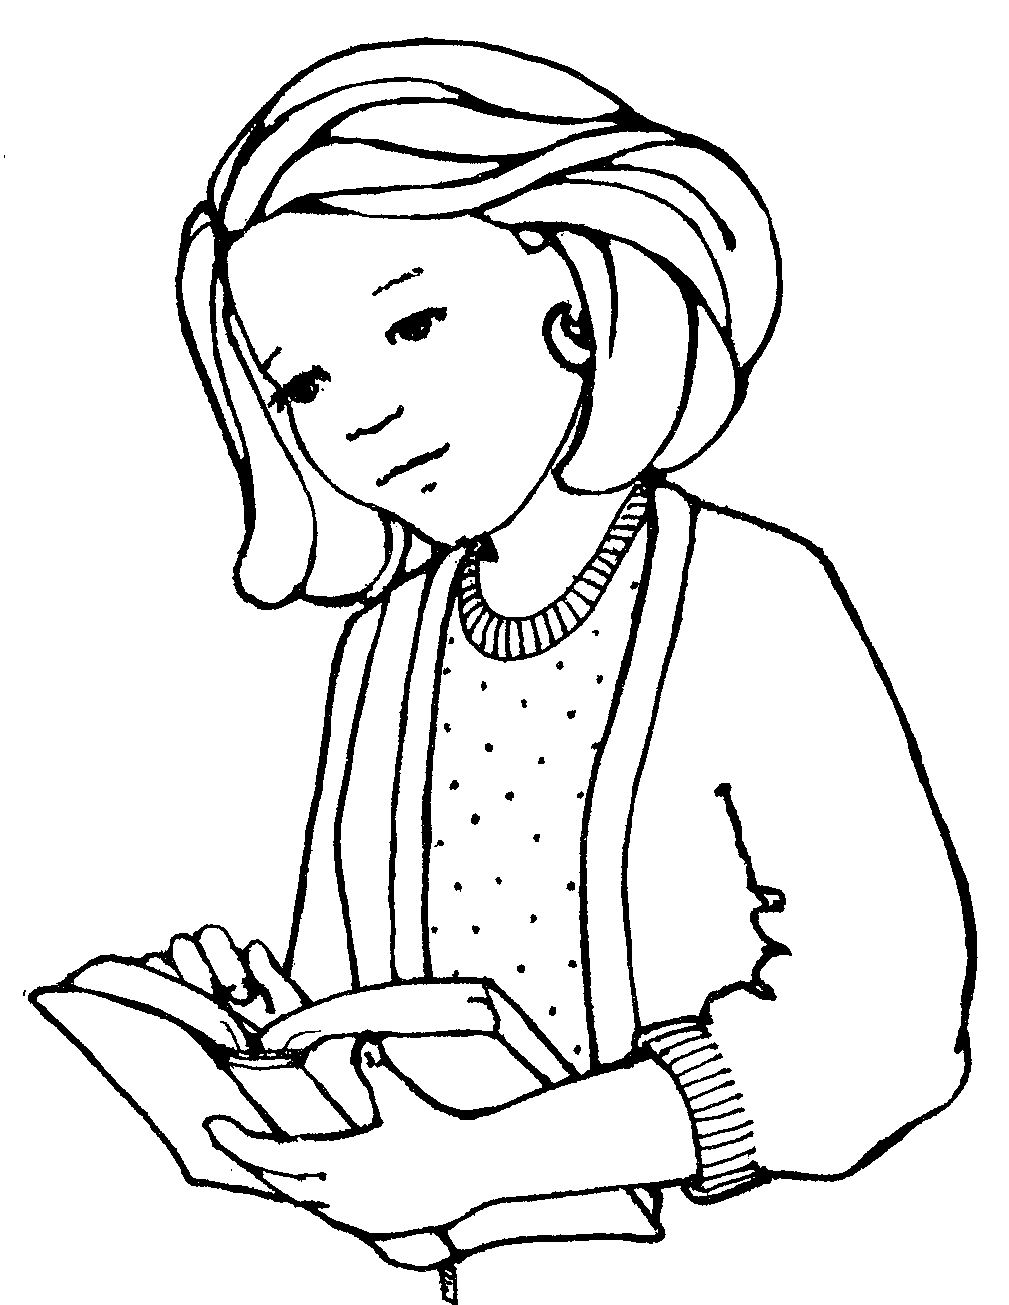 Girl reading book clipart black and white 